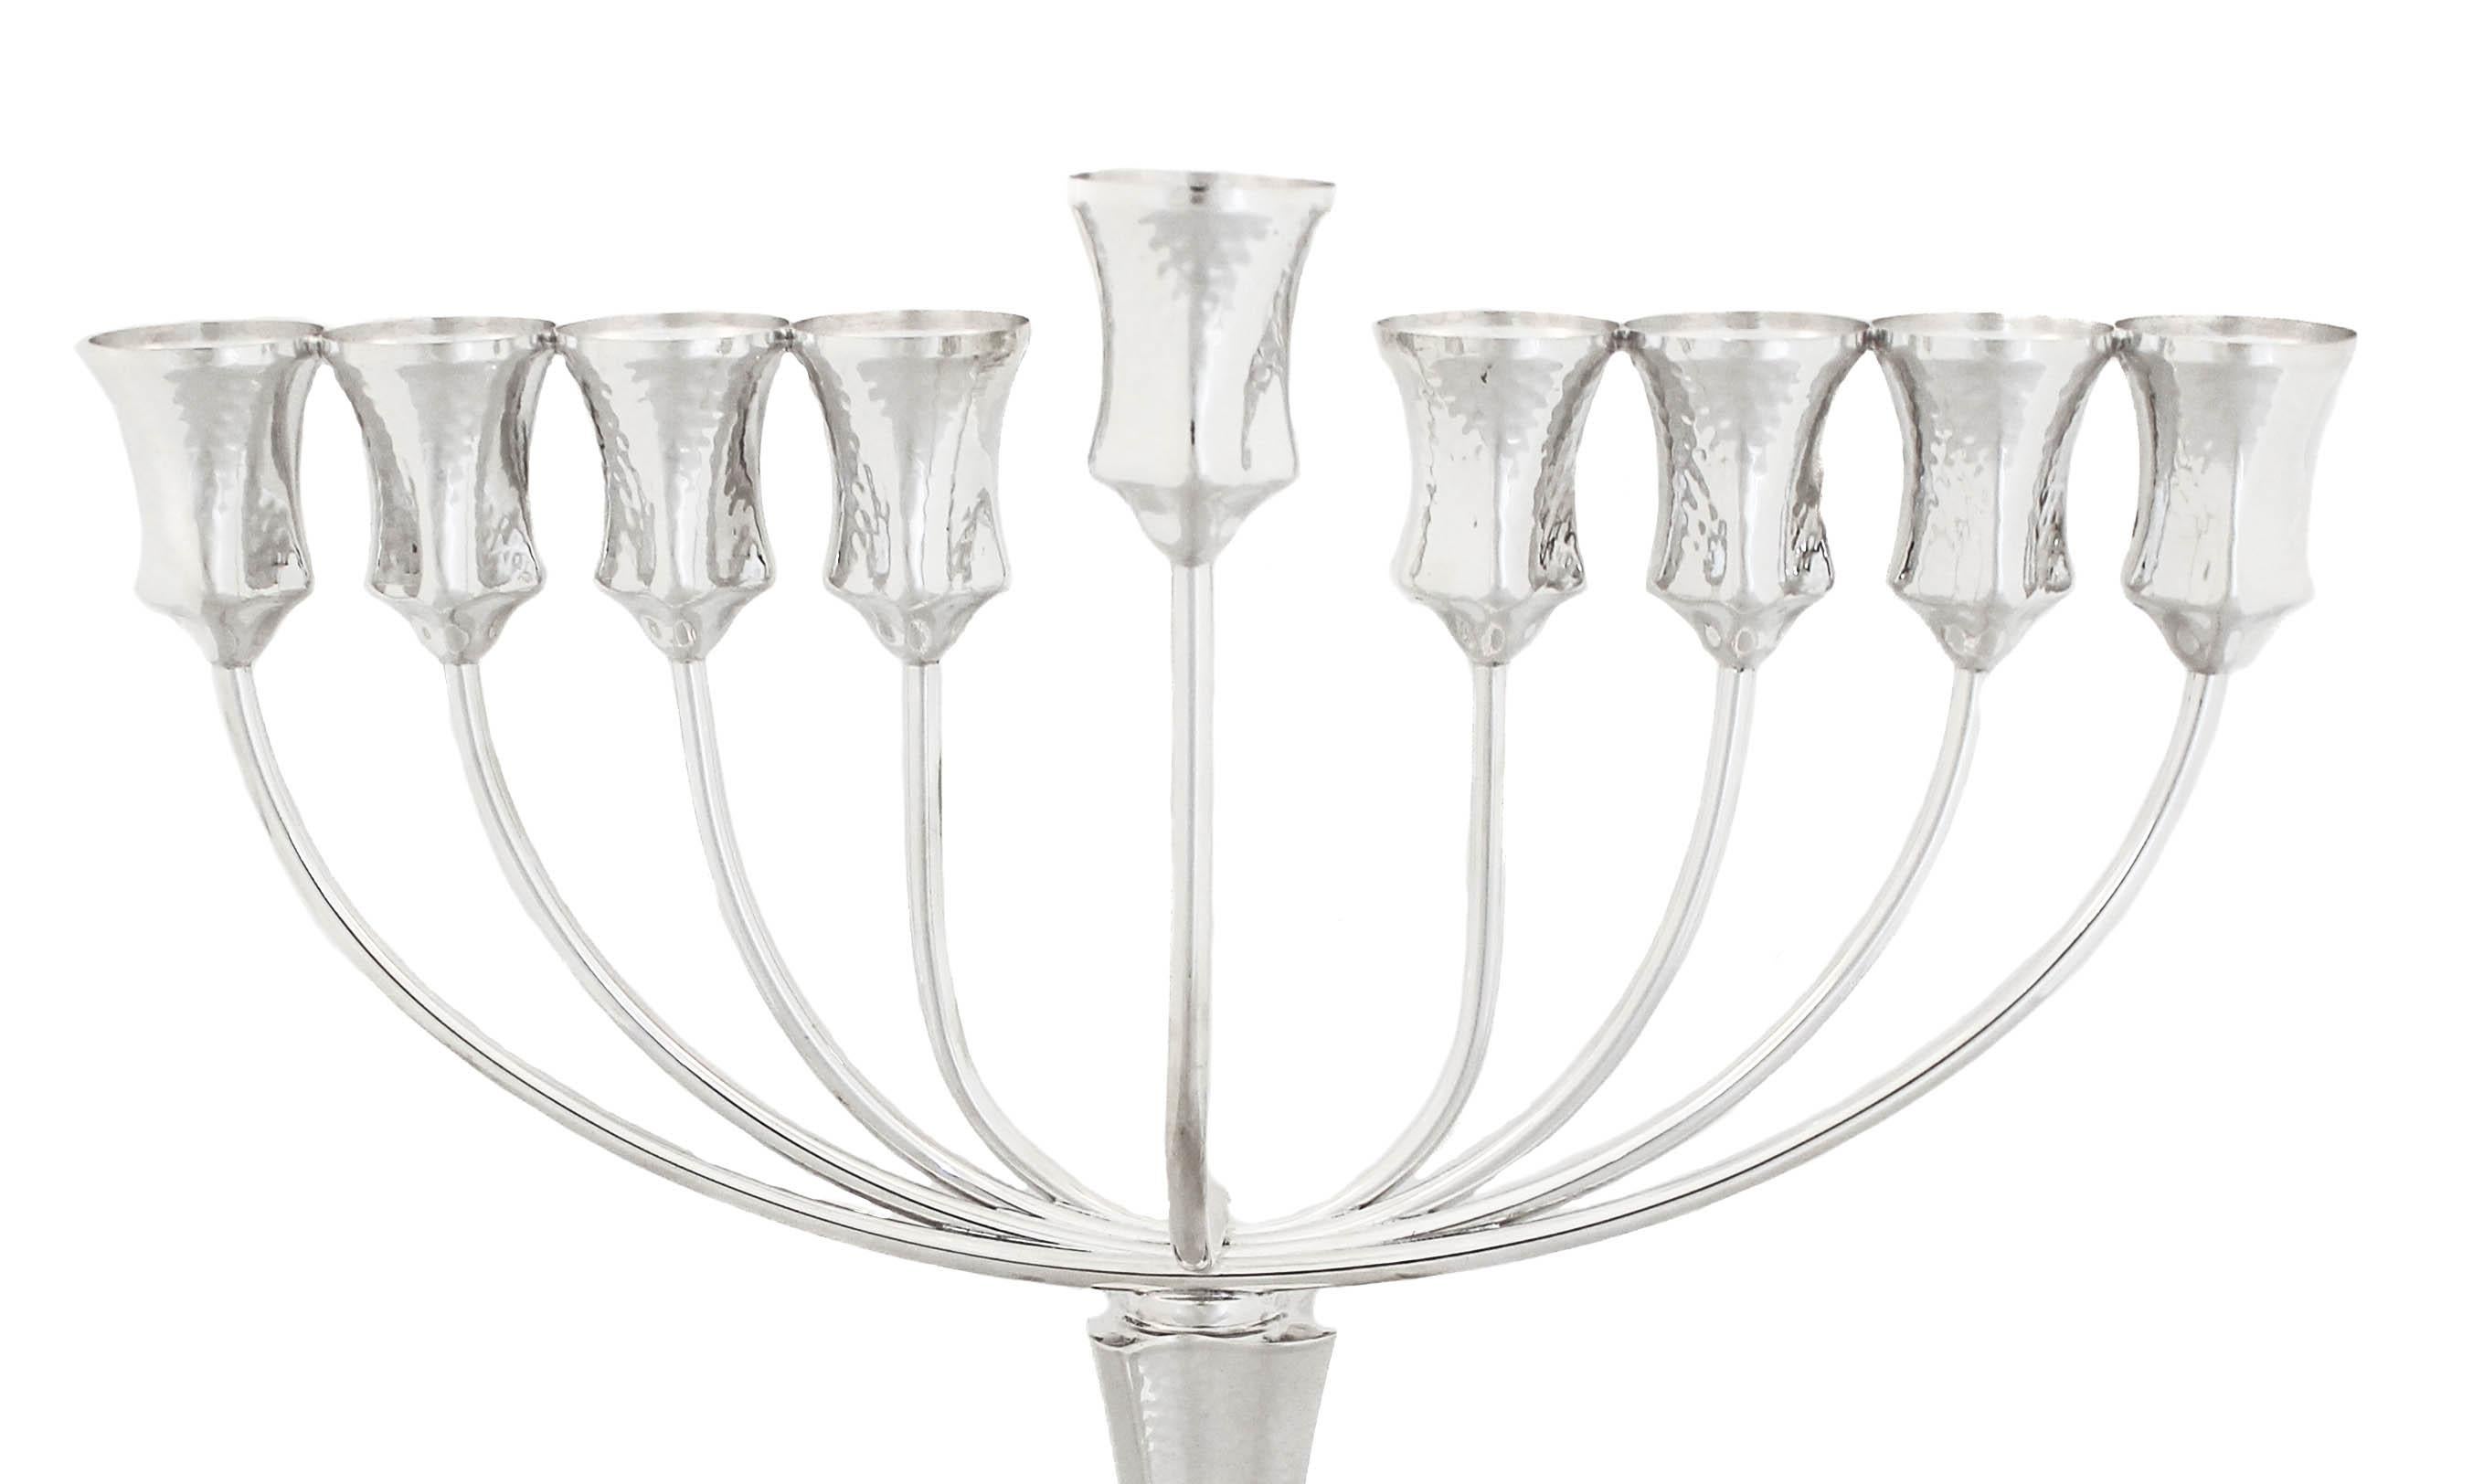 Being offered is a new sterling silver menorah made in Israel.  It has a hammered finish with a swirl base and square shape cups.  The menorah unscrews in the center — where the pedestal meets the top for easy storage.  A beautiful modern piece to